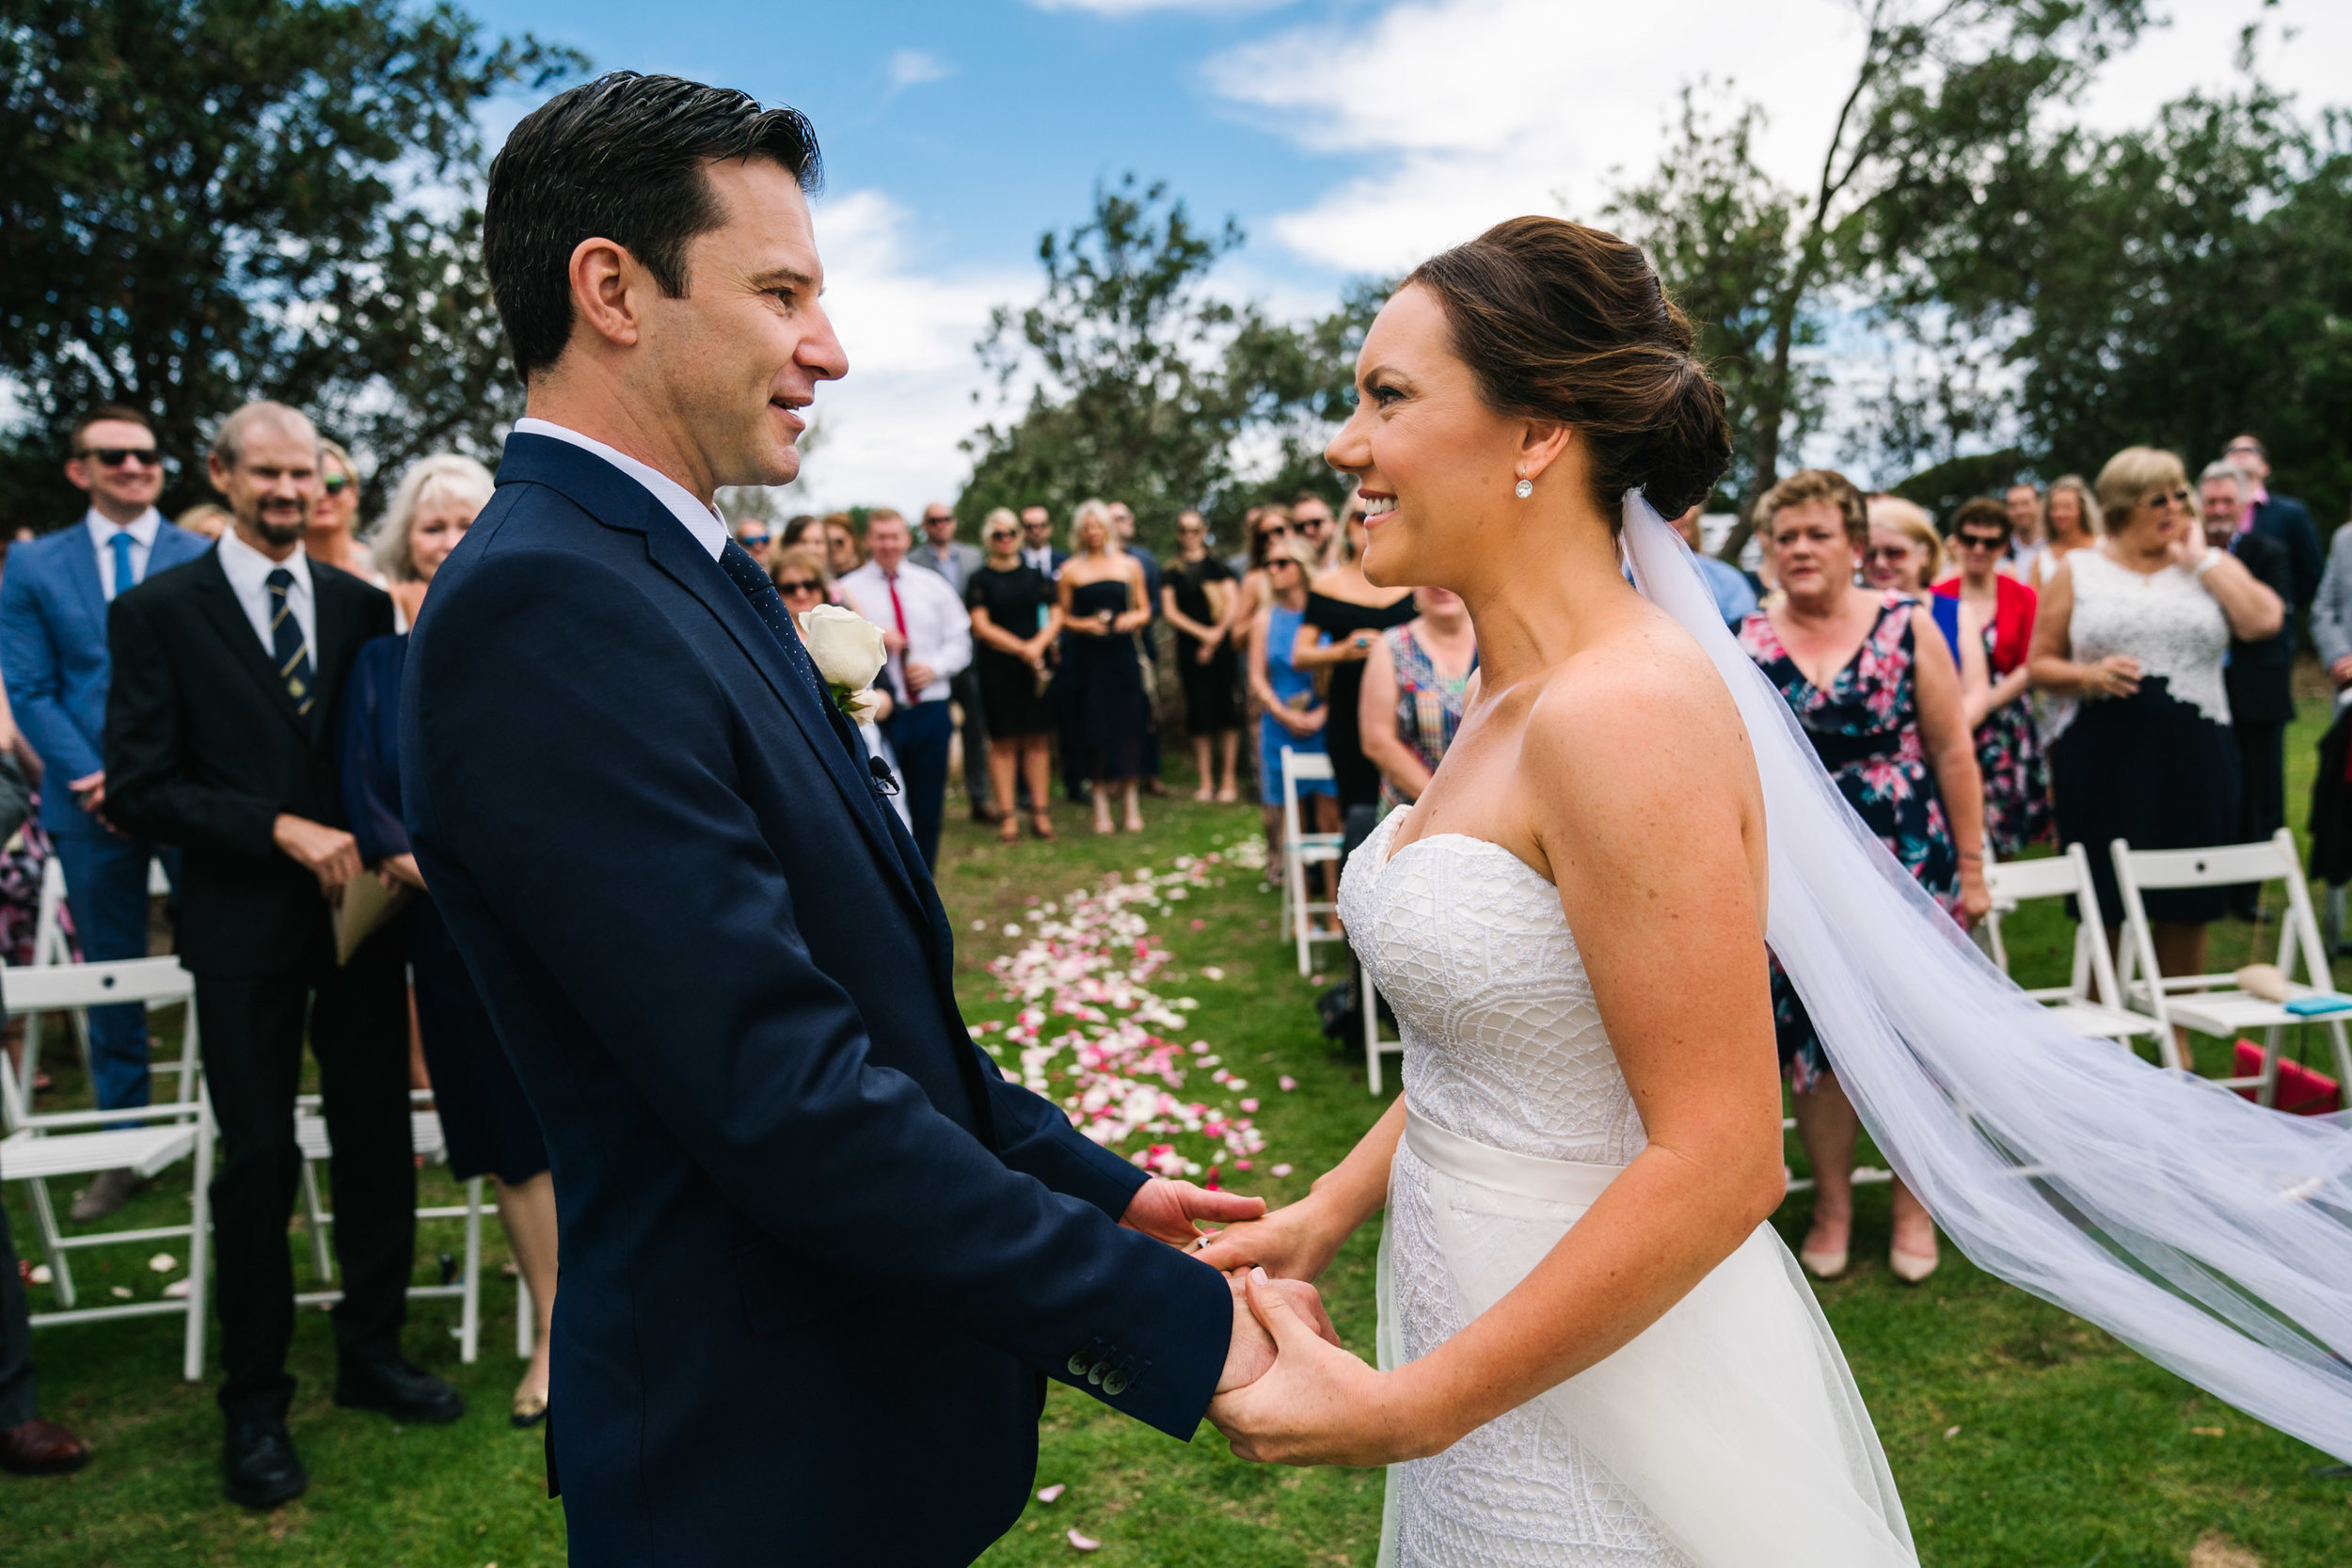 Bride and groom smiling while guests look on at their Shelly Beach wedding